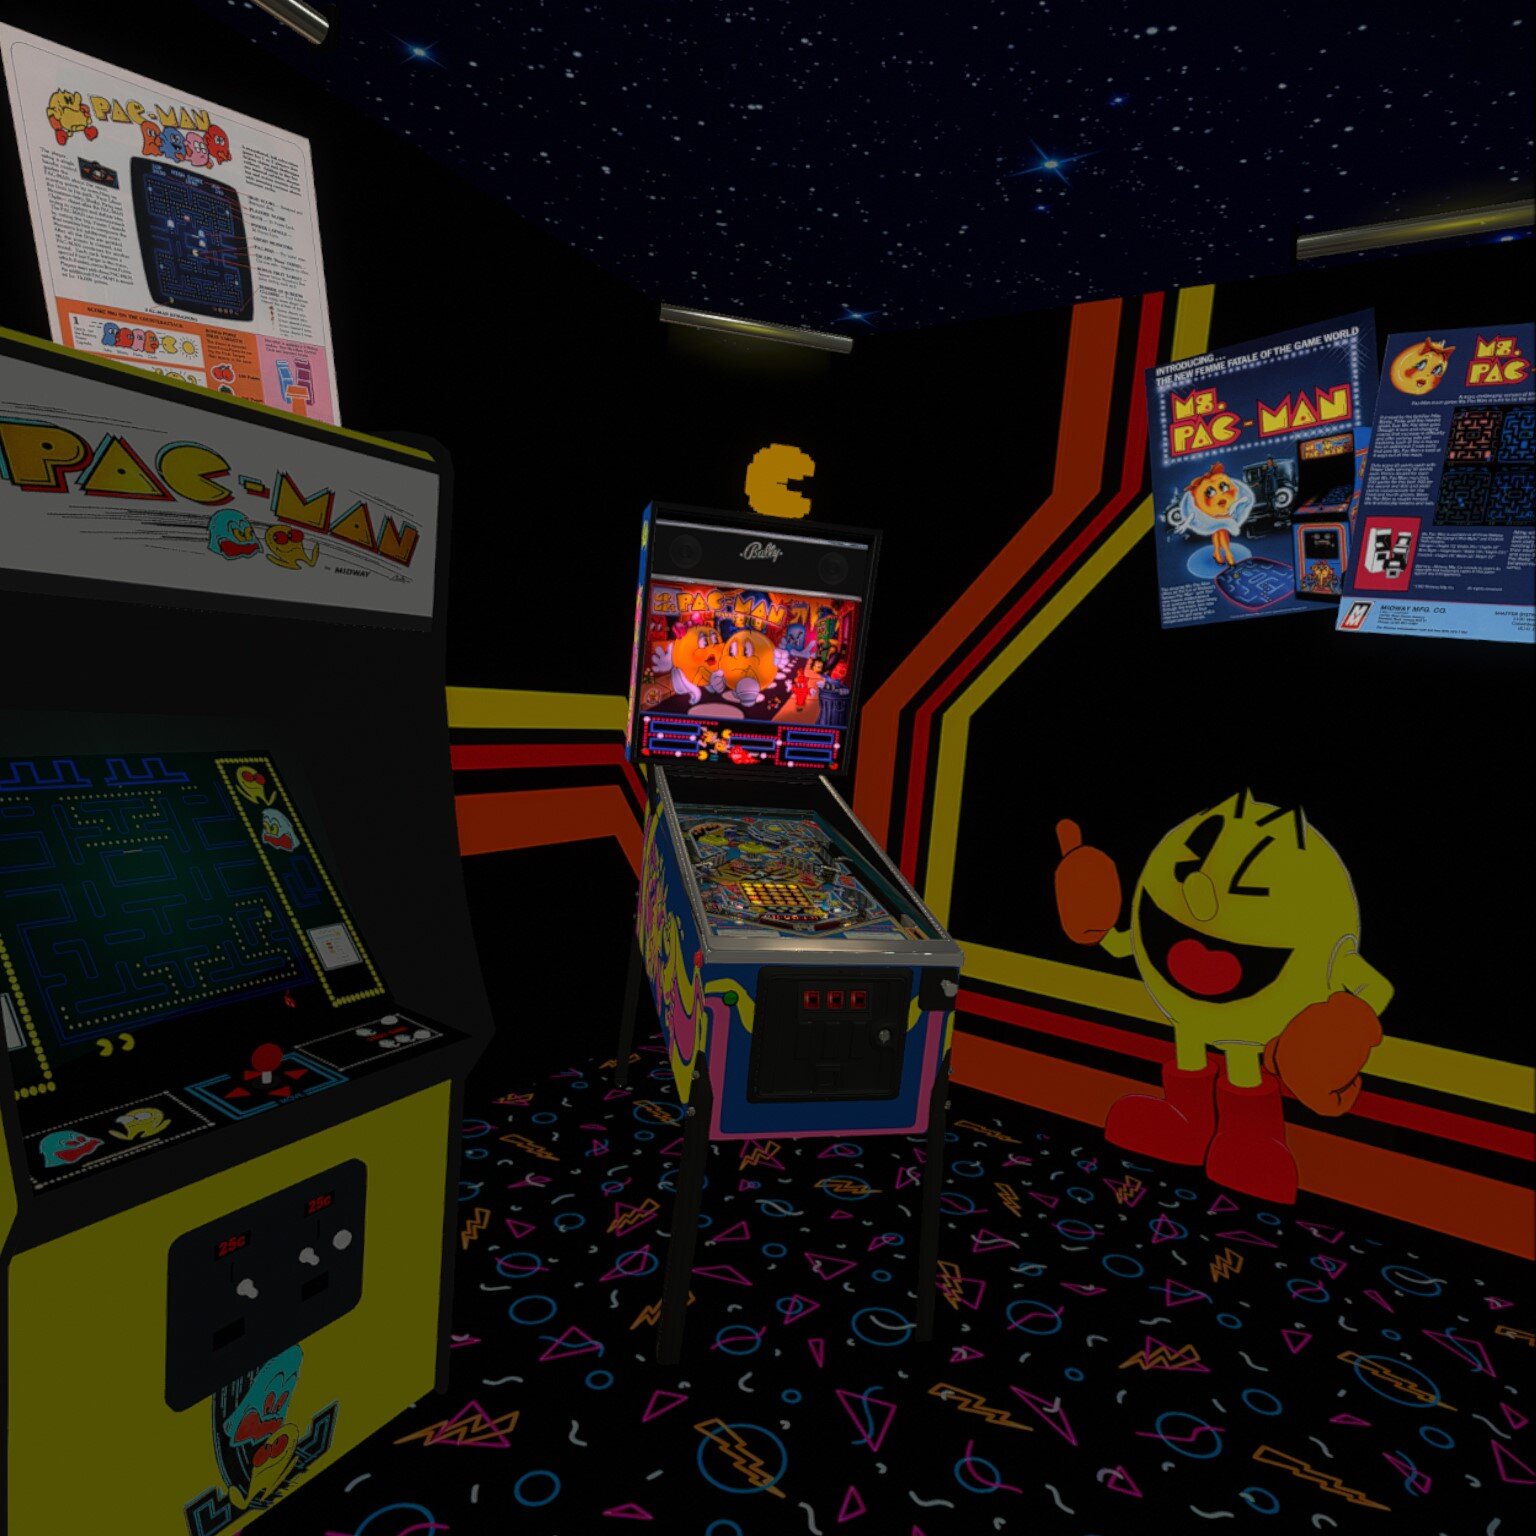 Mr. and Mrs. Pac-Man (Bally 1982)_VR Room